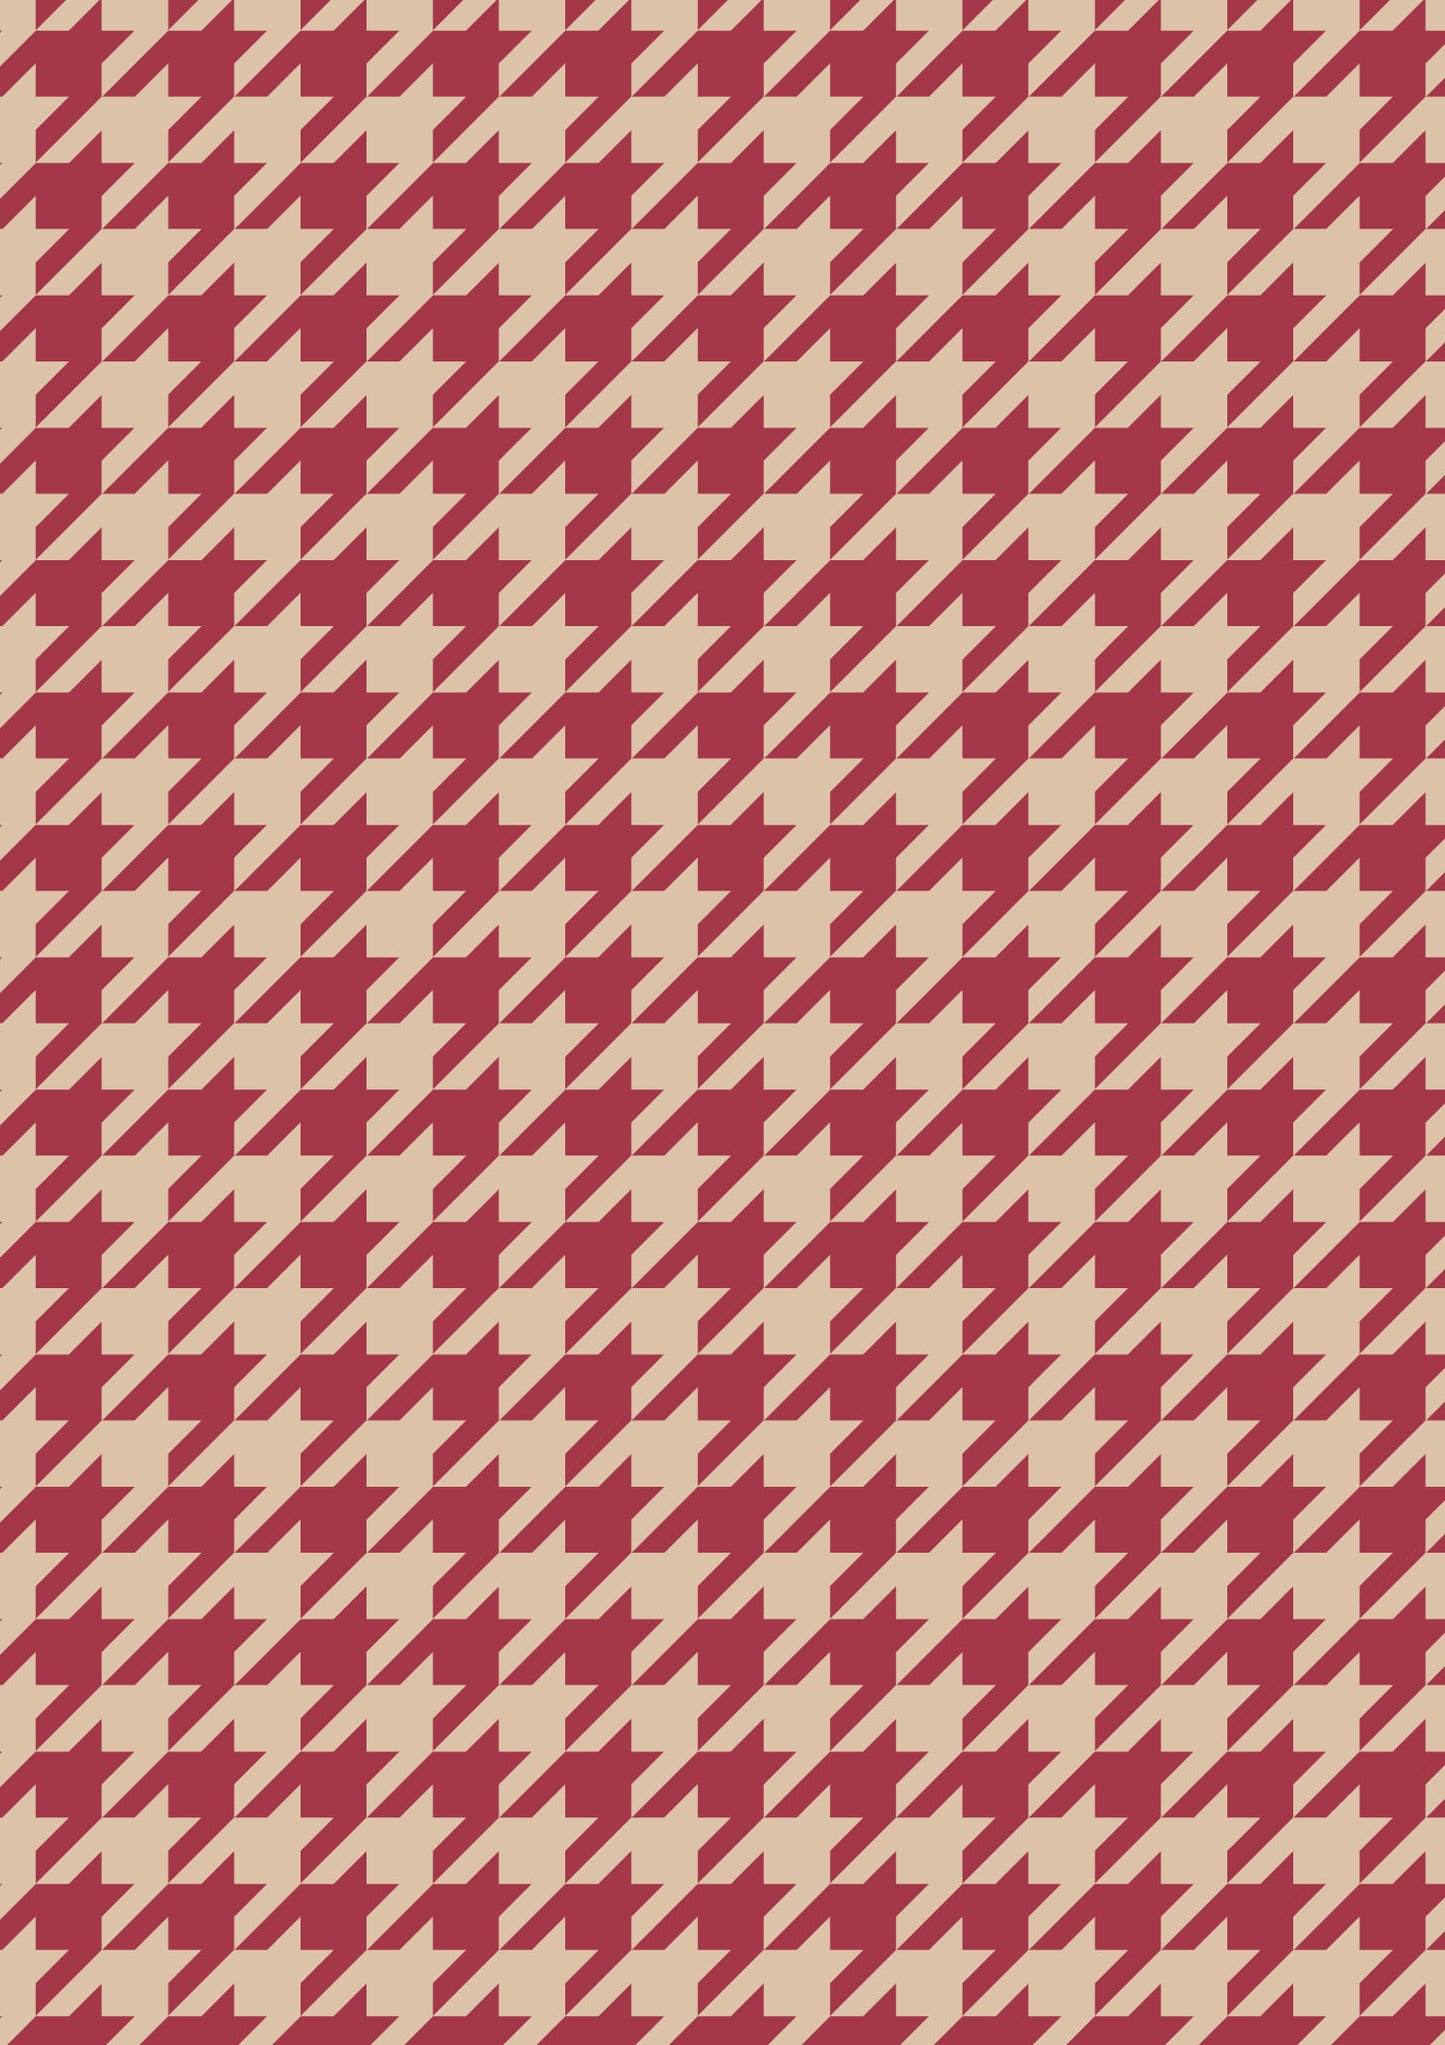 Beige and Viva Magenta A1 Photography Backdrop - Houndstooth